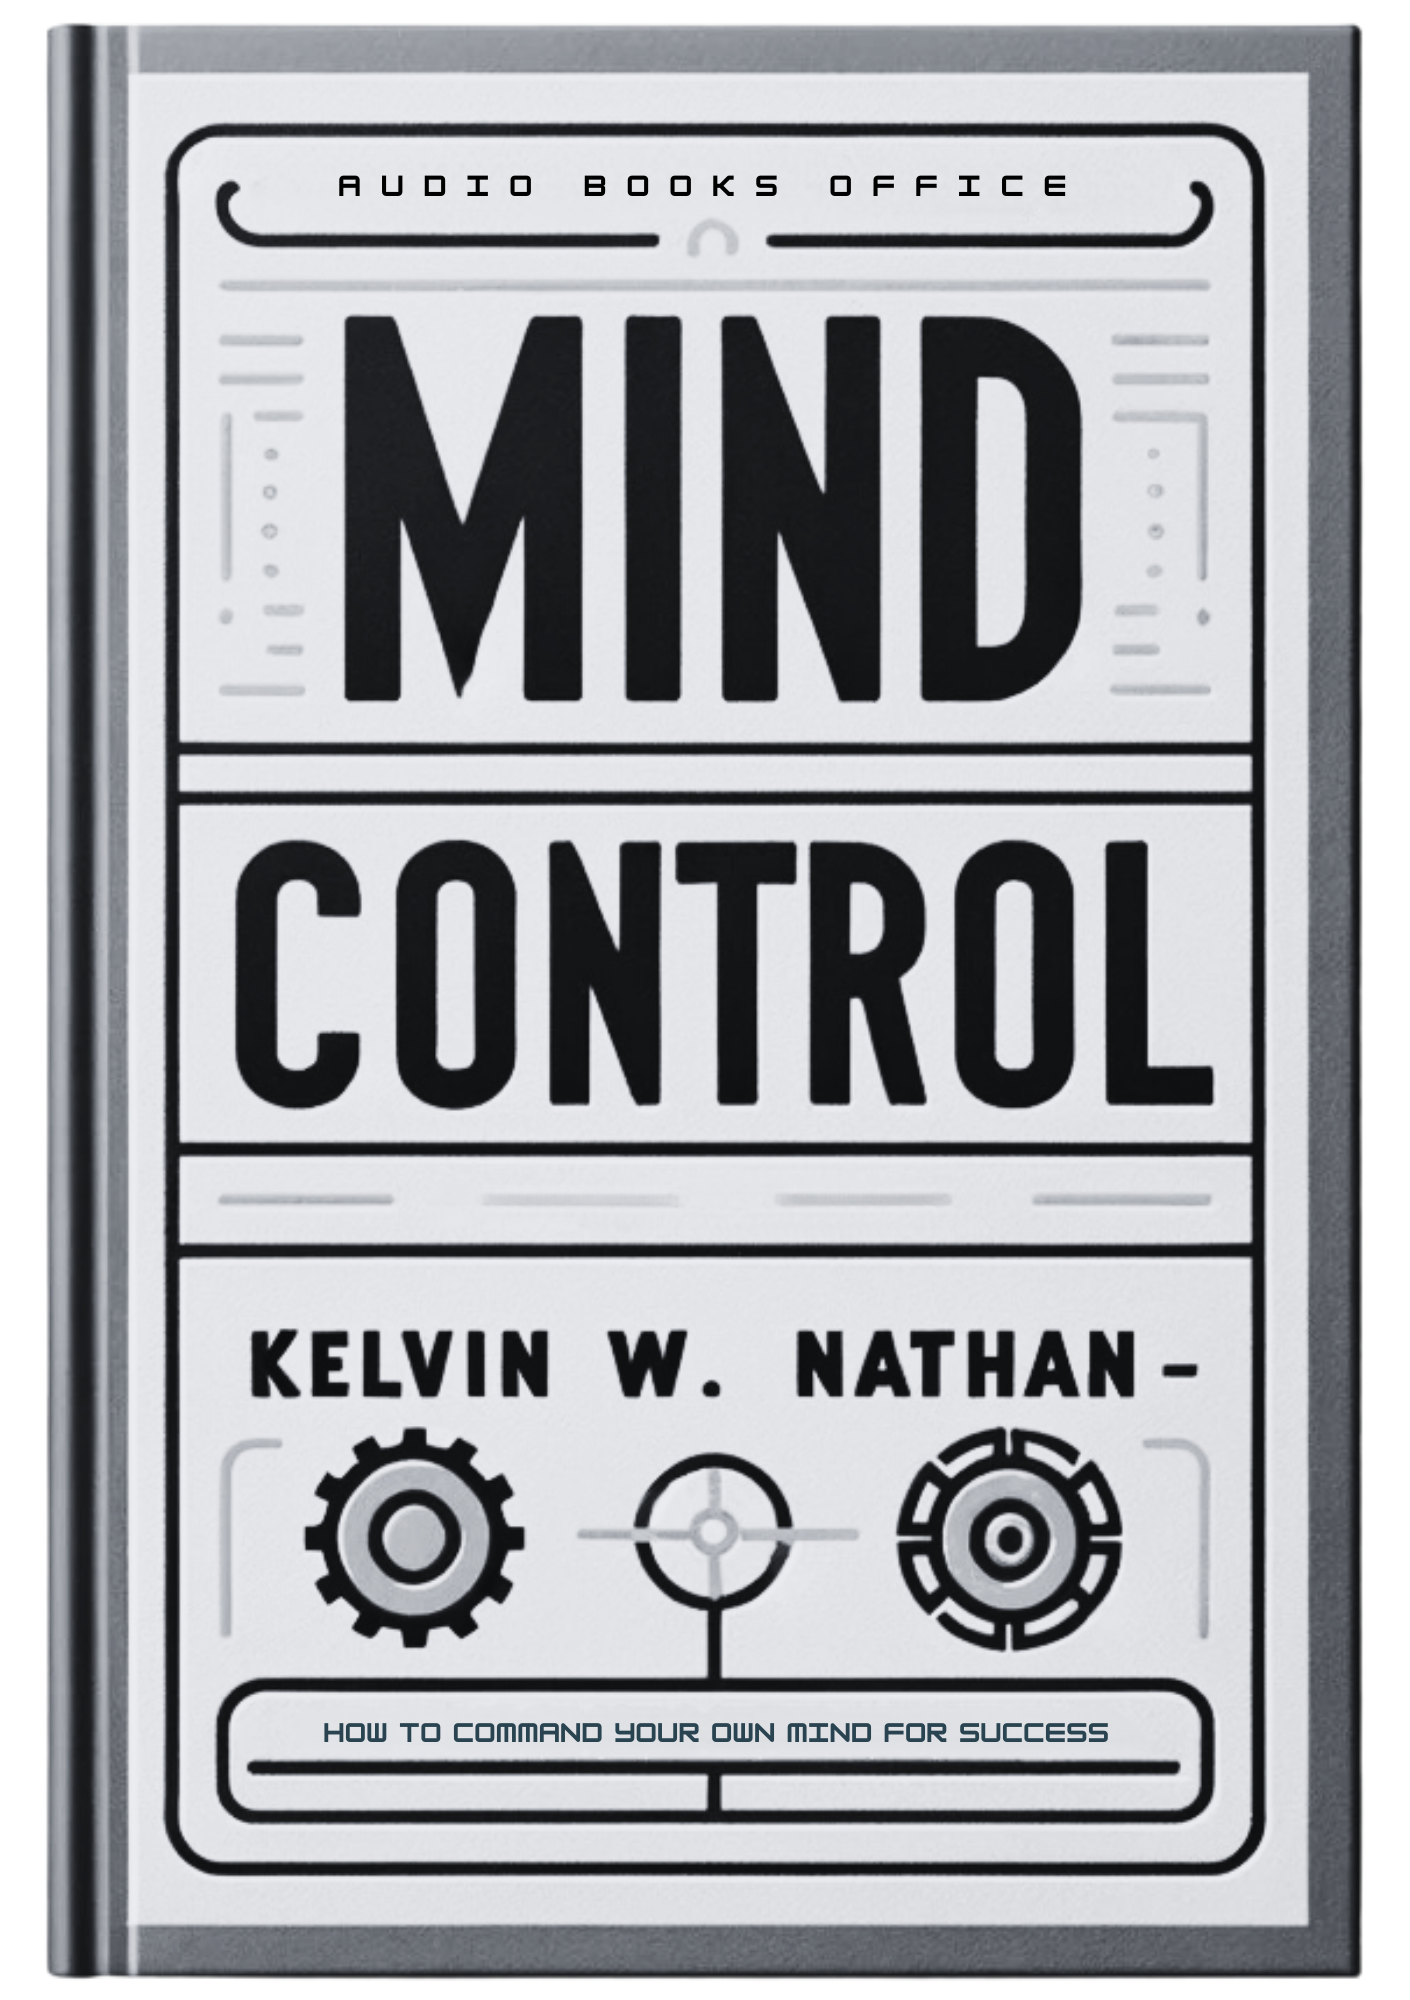 Mind Control: How to Convince Your Mind to Be Successful